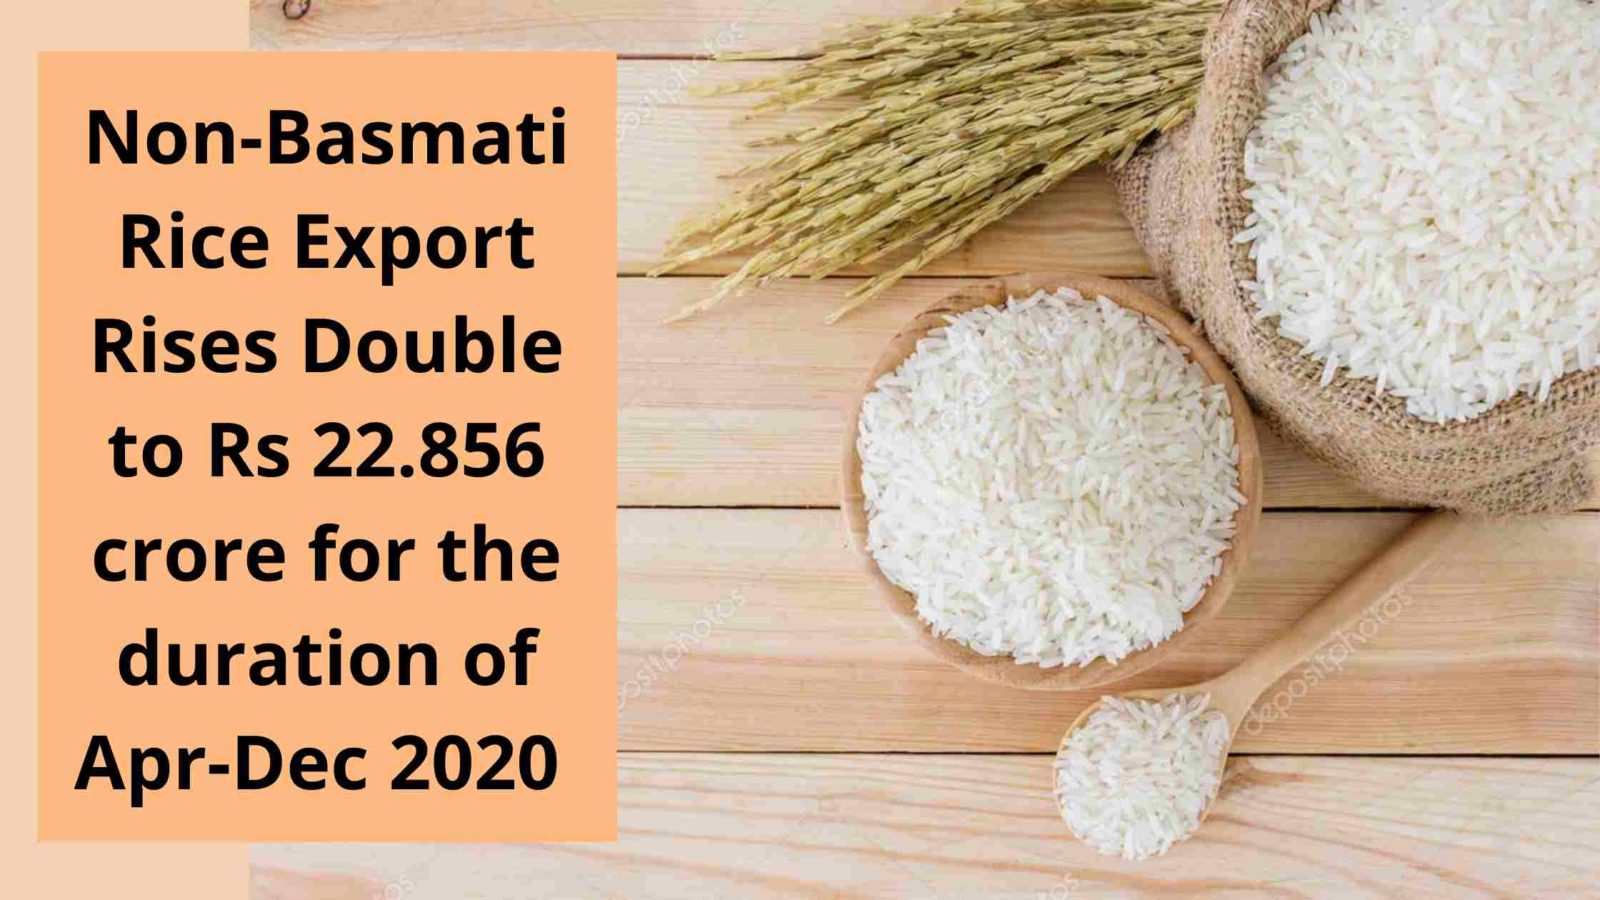 Export of non-basmati rice rise high